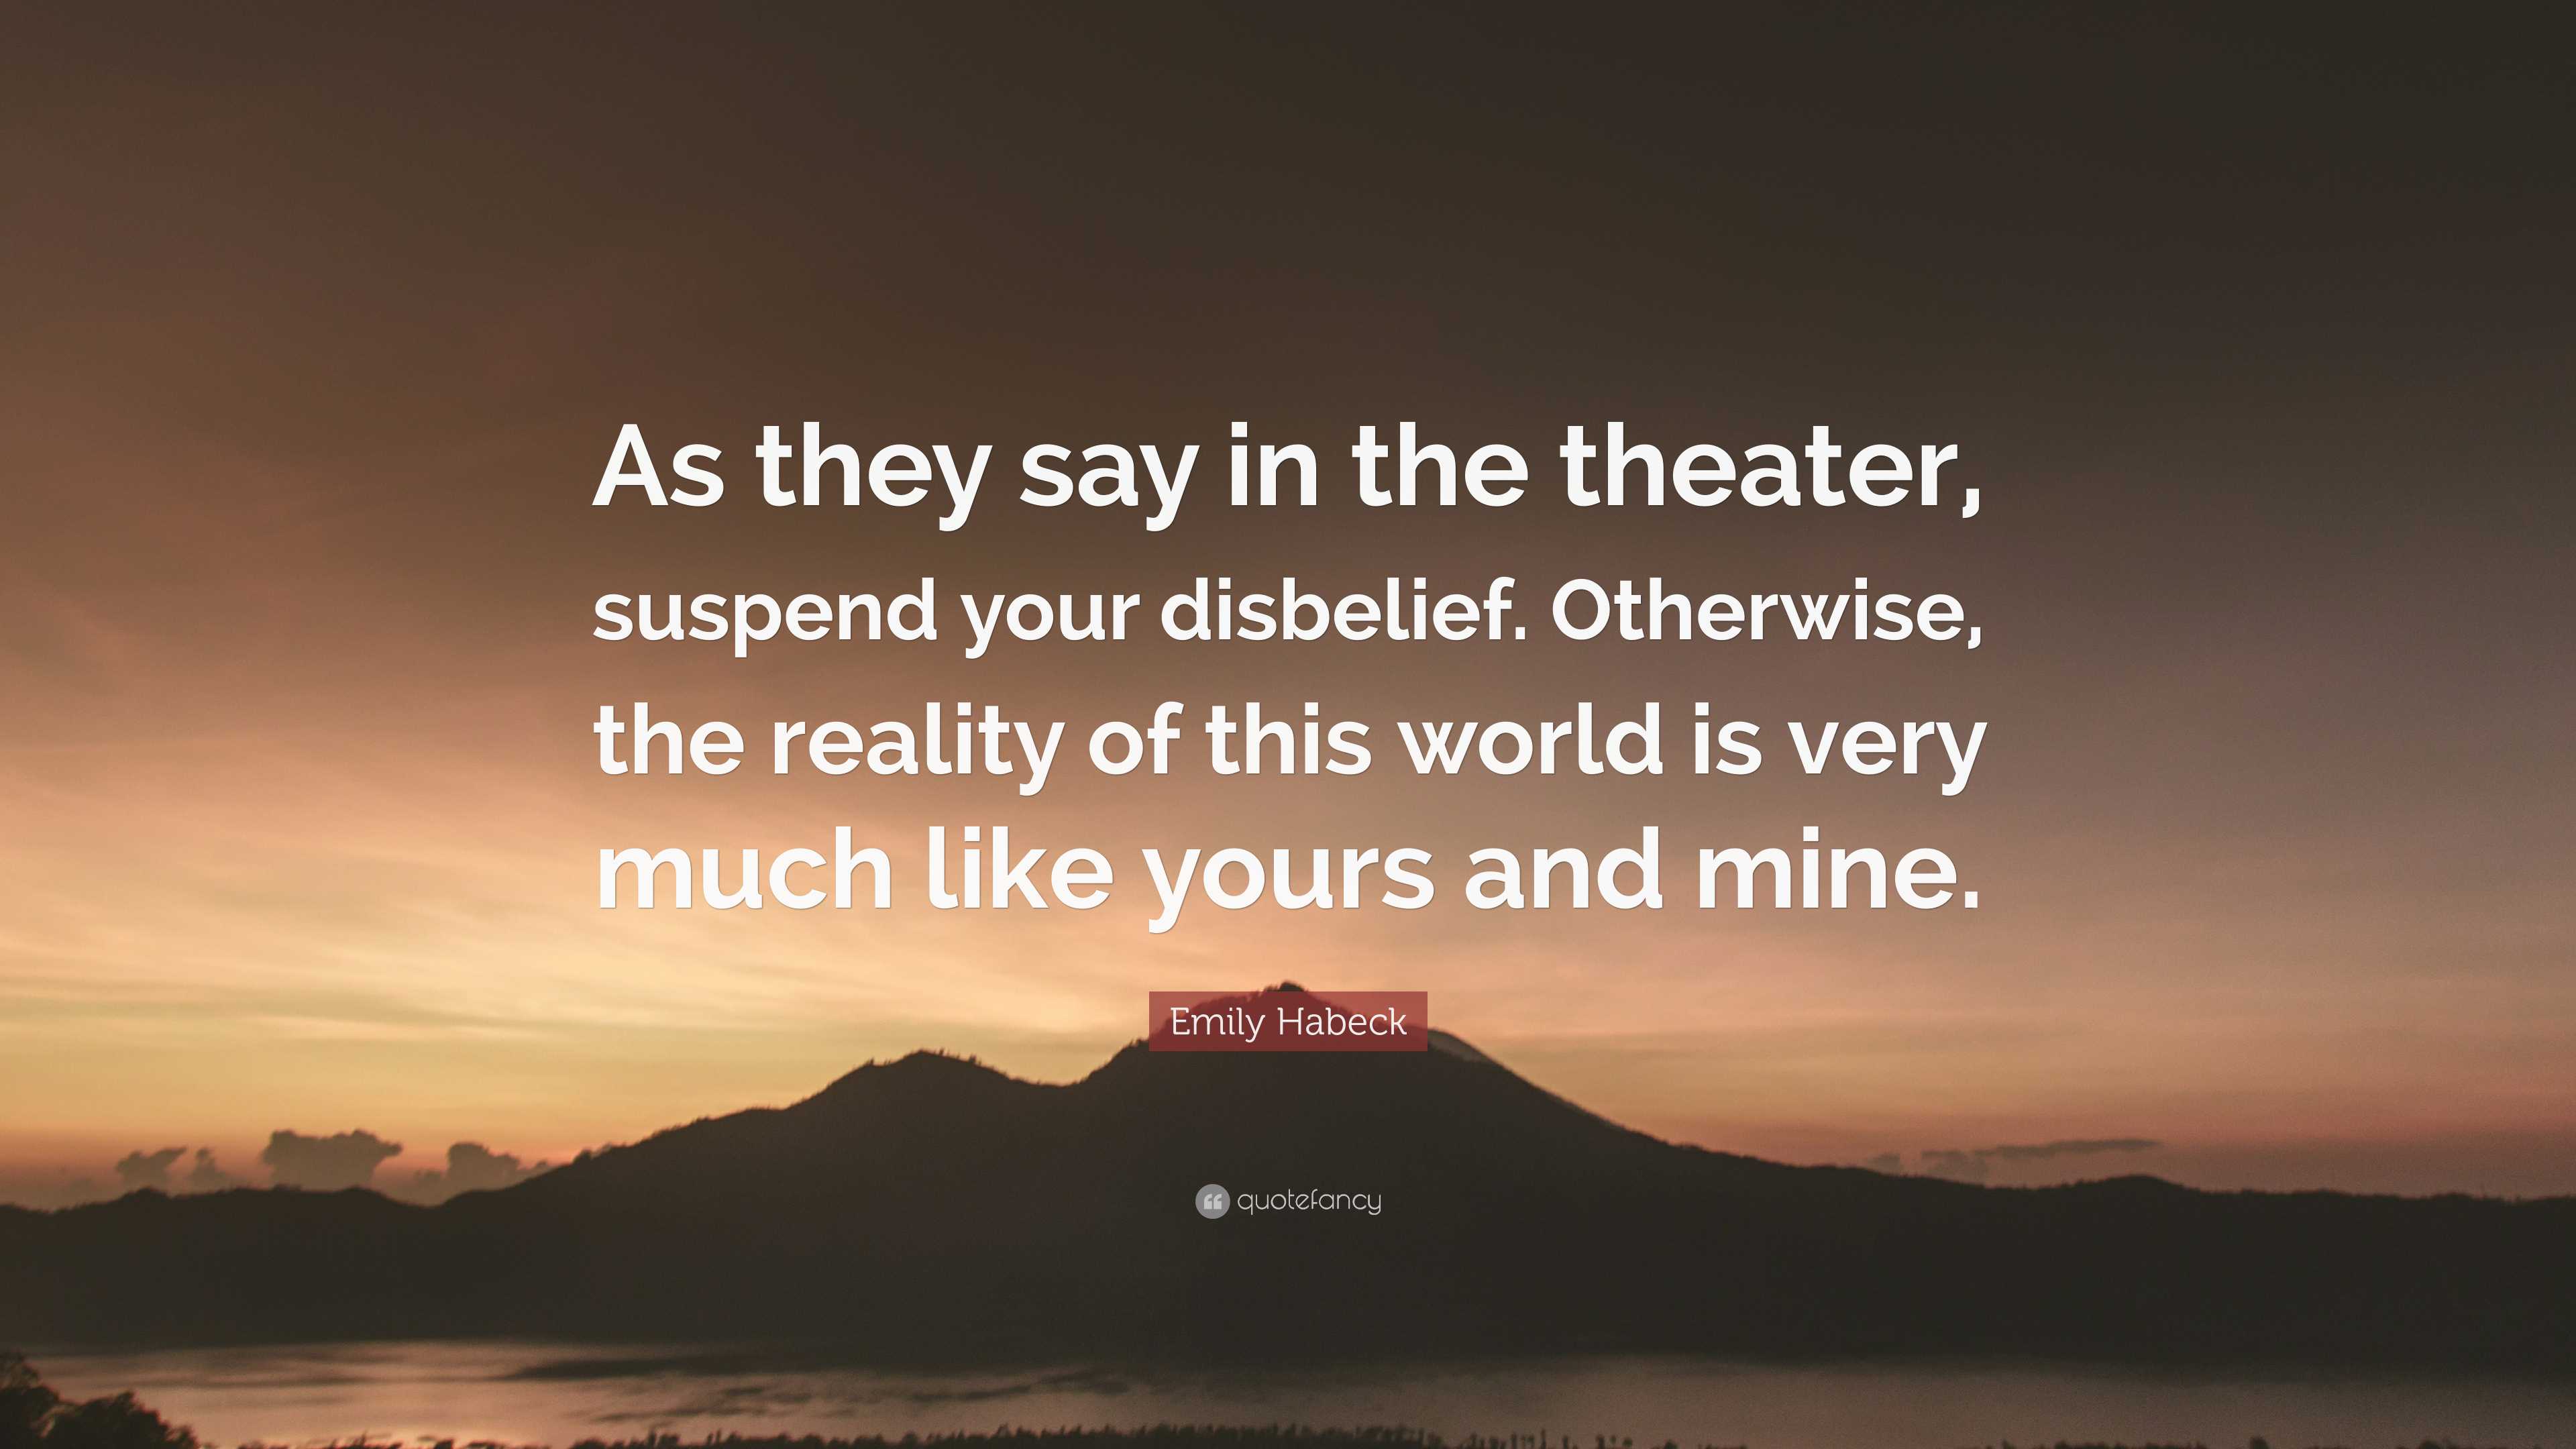 Emily Habeck Quote: “As they say in the theater, suspend your disbelief ...